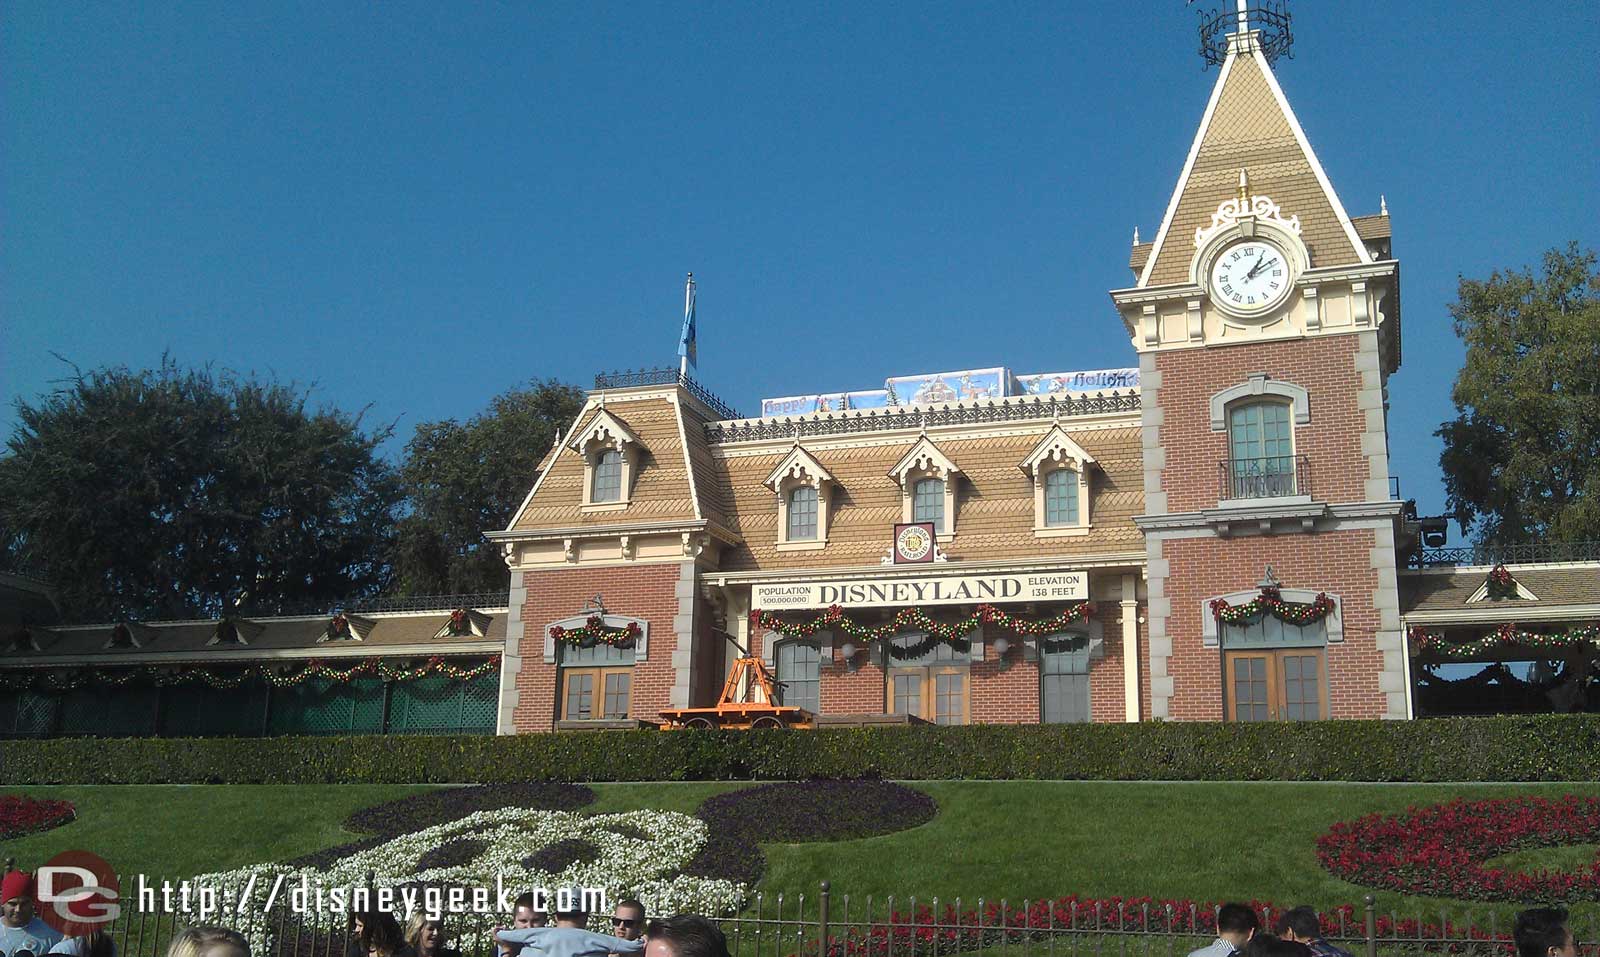 Just arrived at the Disneyland Resort. First stop today Disneyland.